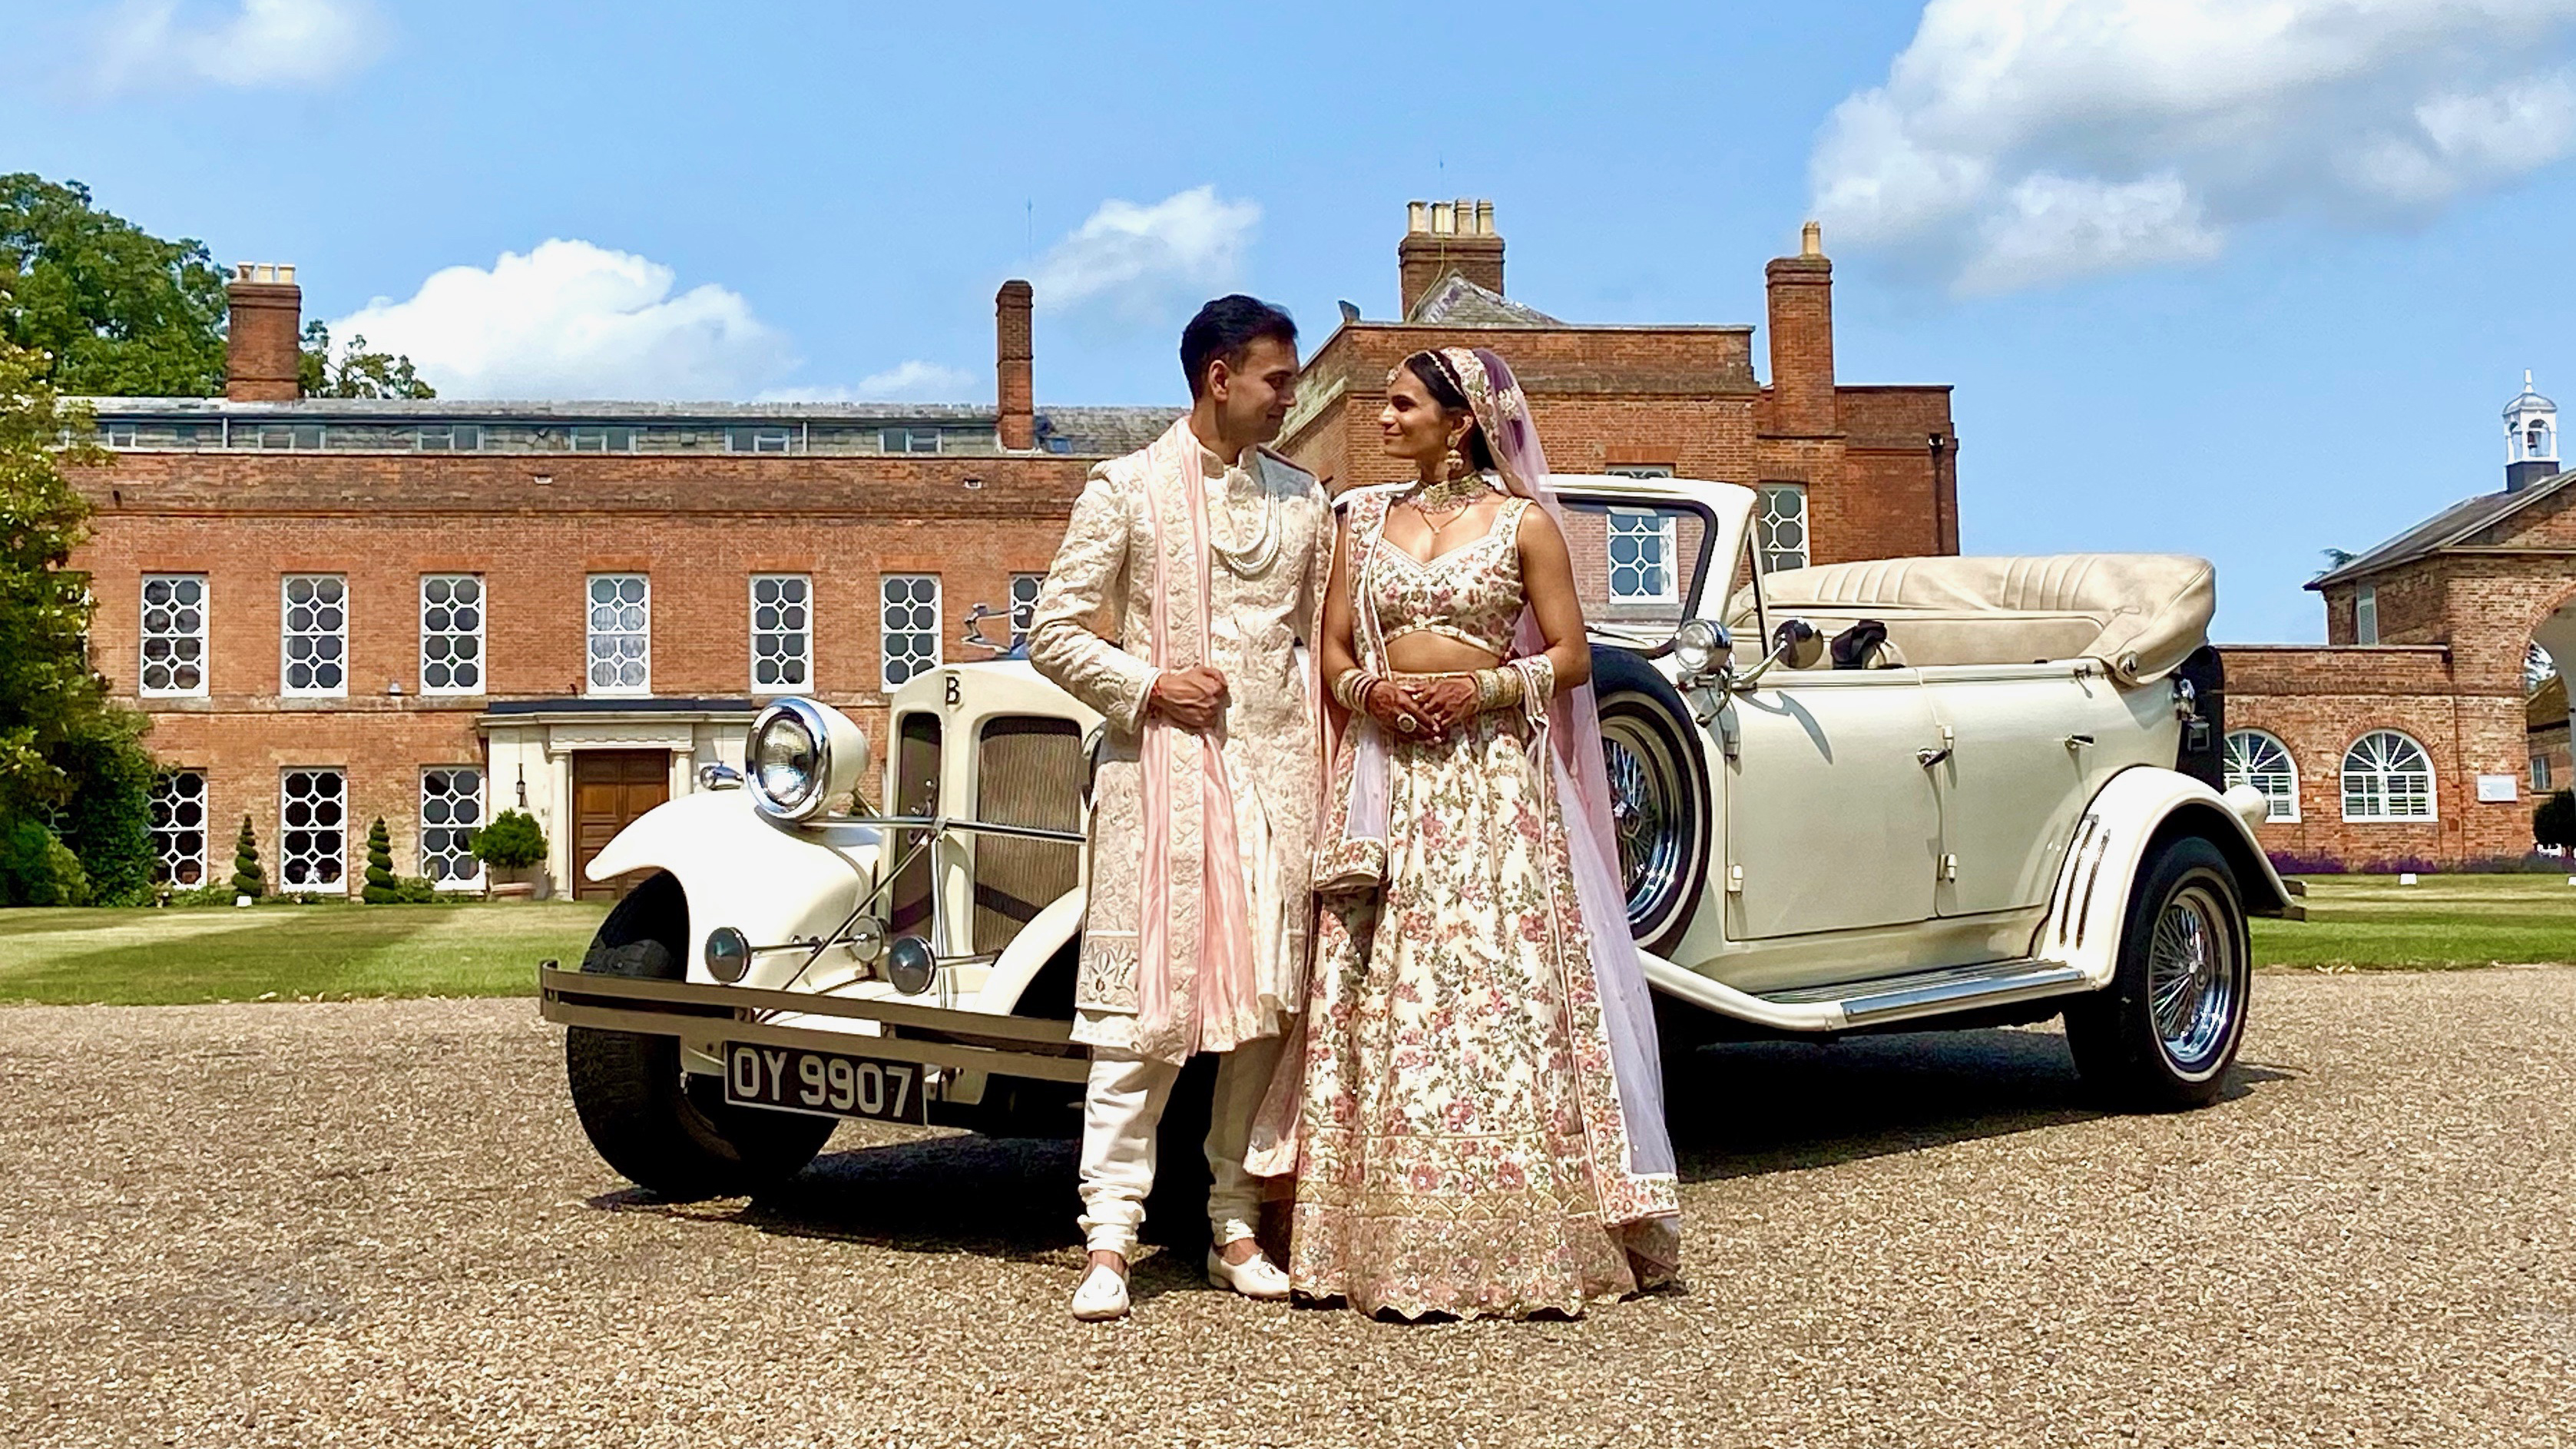 Vintage Beauford Convertible with roof down. Asian Couple standing in front of the vehicle smiling at each others.